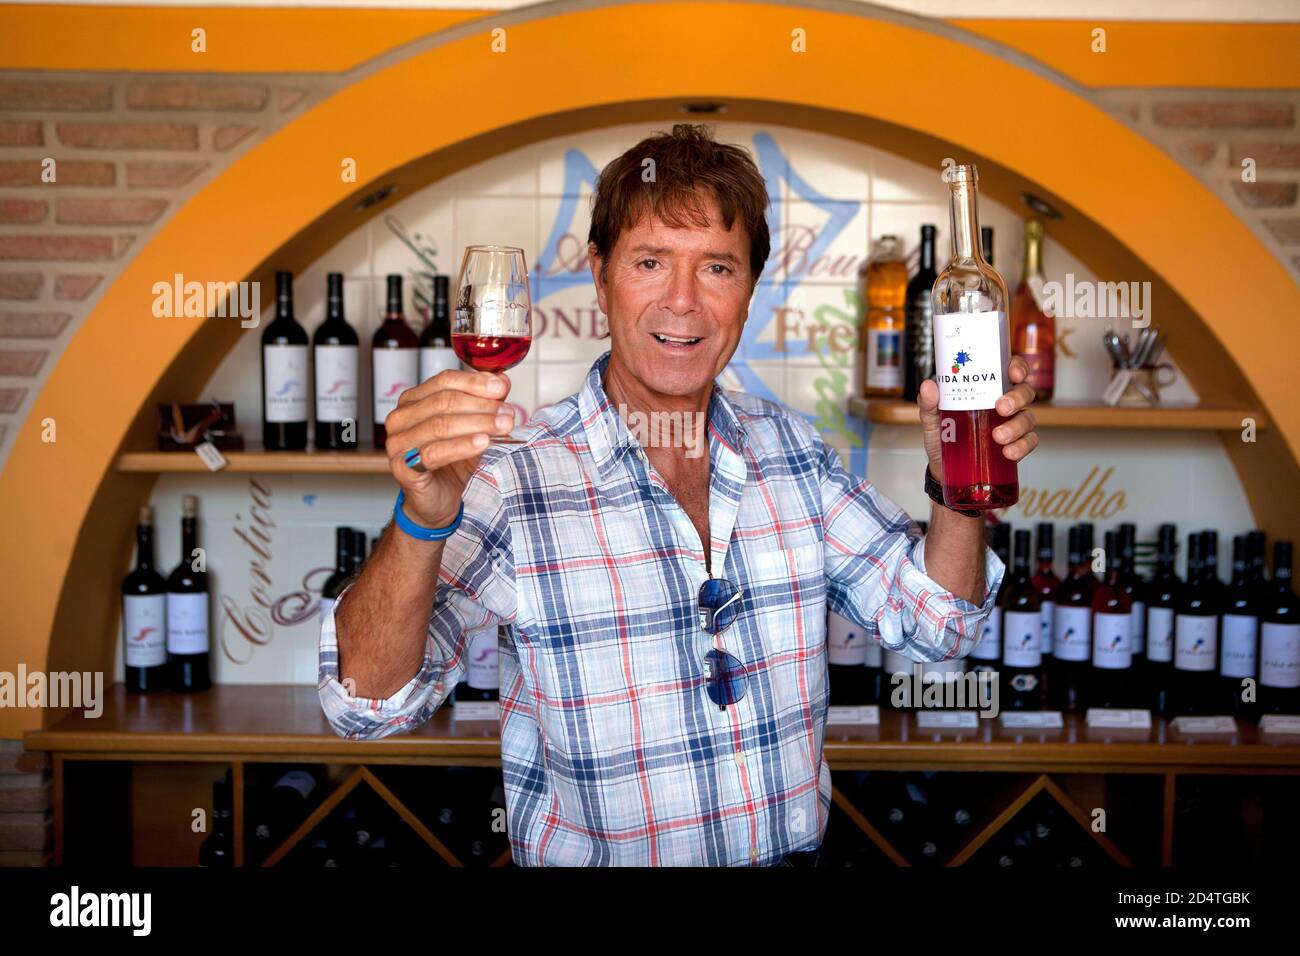 Cliff Richard at his Adoga do Cantor winery in Albufeira,Algarve,Portugal Stock Photo